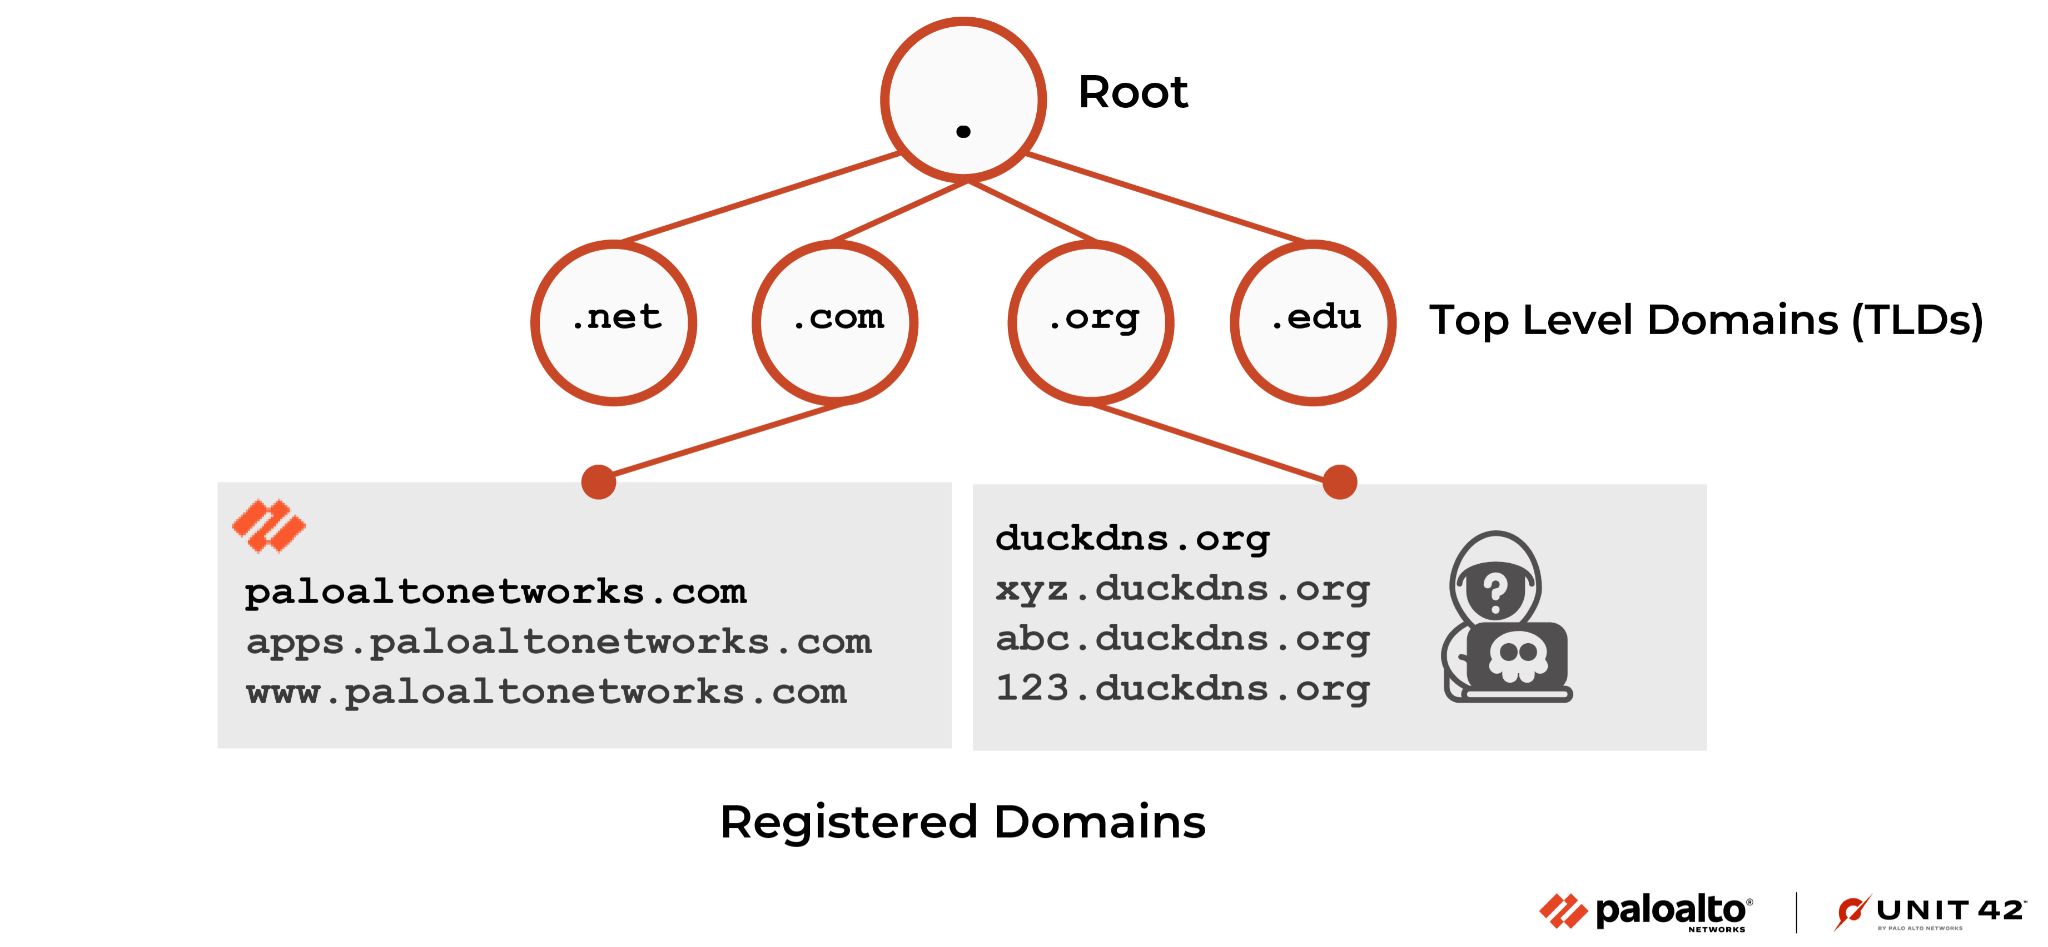 Image 1 is a diagram of the use of registered domains including top level domains (TLDs). From the root, a .com TLD can be either the apps page of Palo Alto Networks or the main Palo Alto Networks site. Other registered domains include duckpins.org sites. 